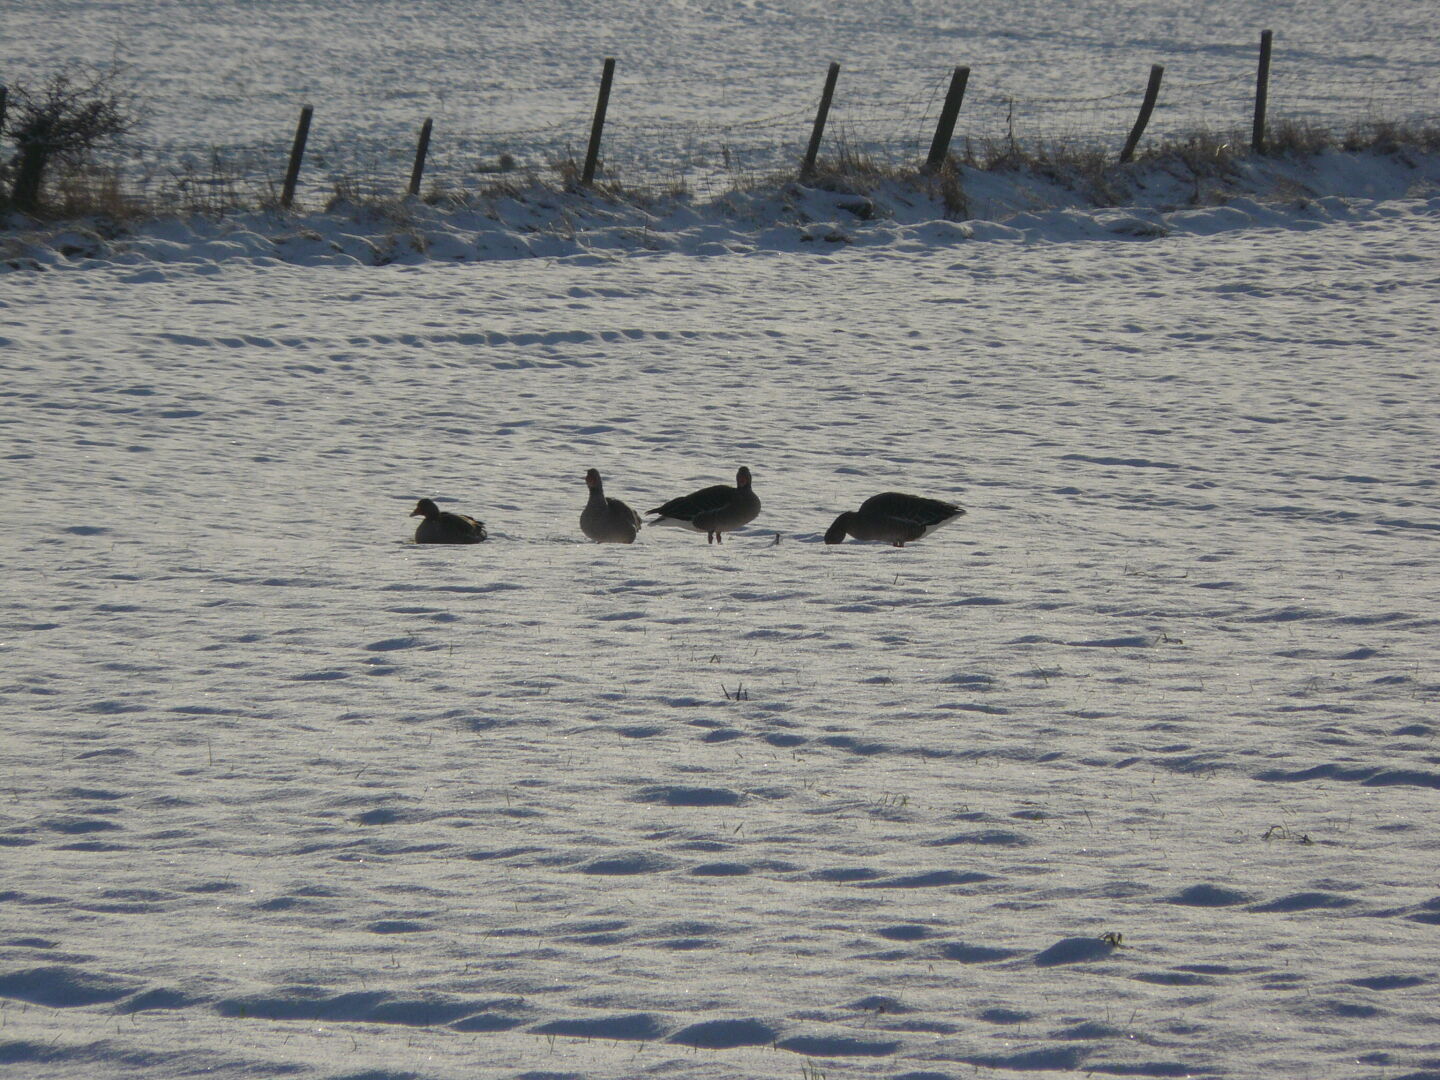 The geese are looking for food beneath the snow.